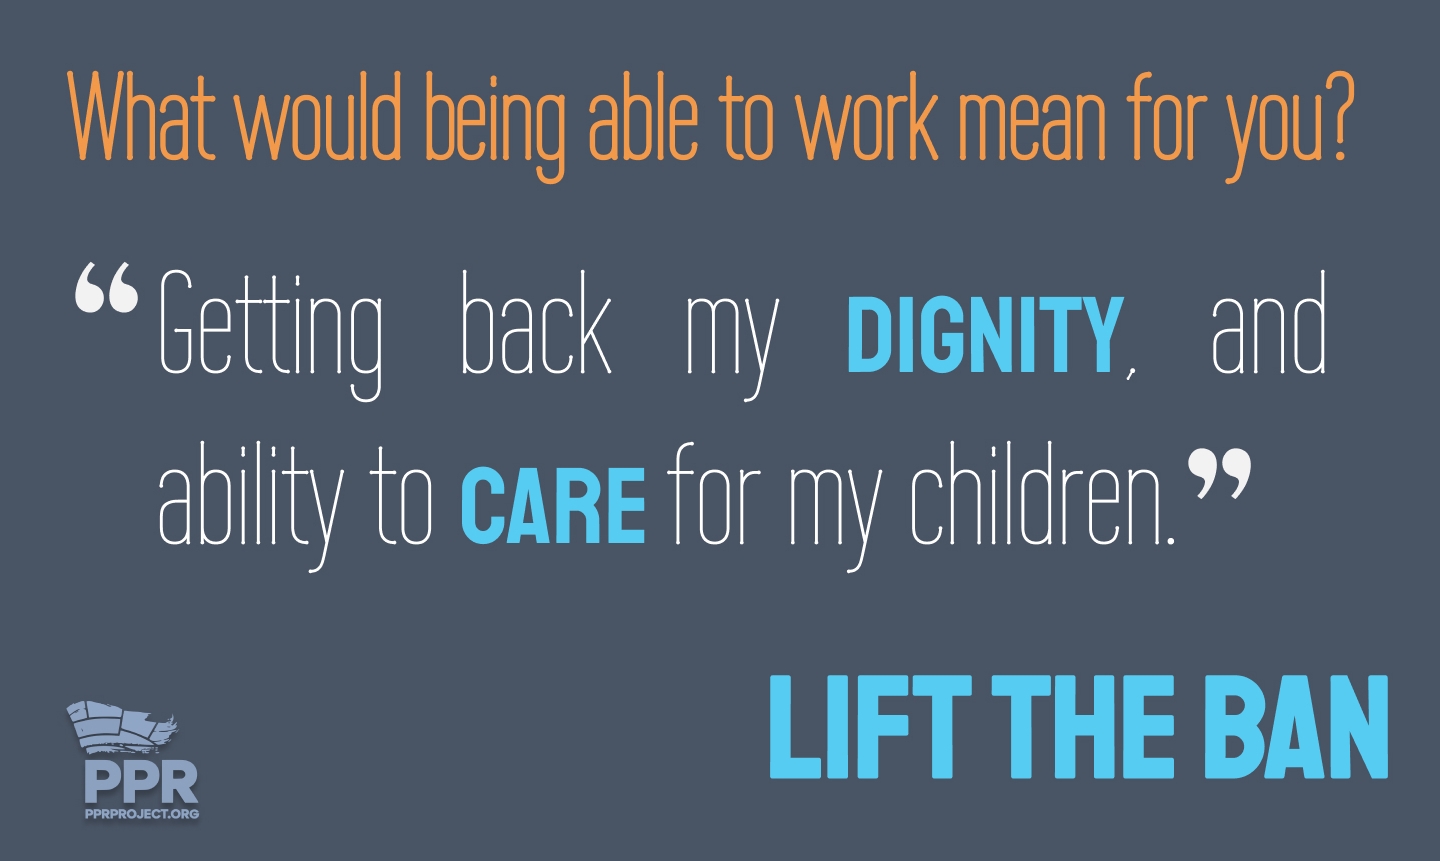 What would being able to work mean for you? Getting back my dignity, and ability to care for my children.